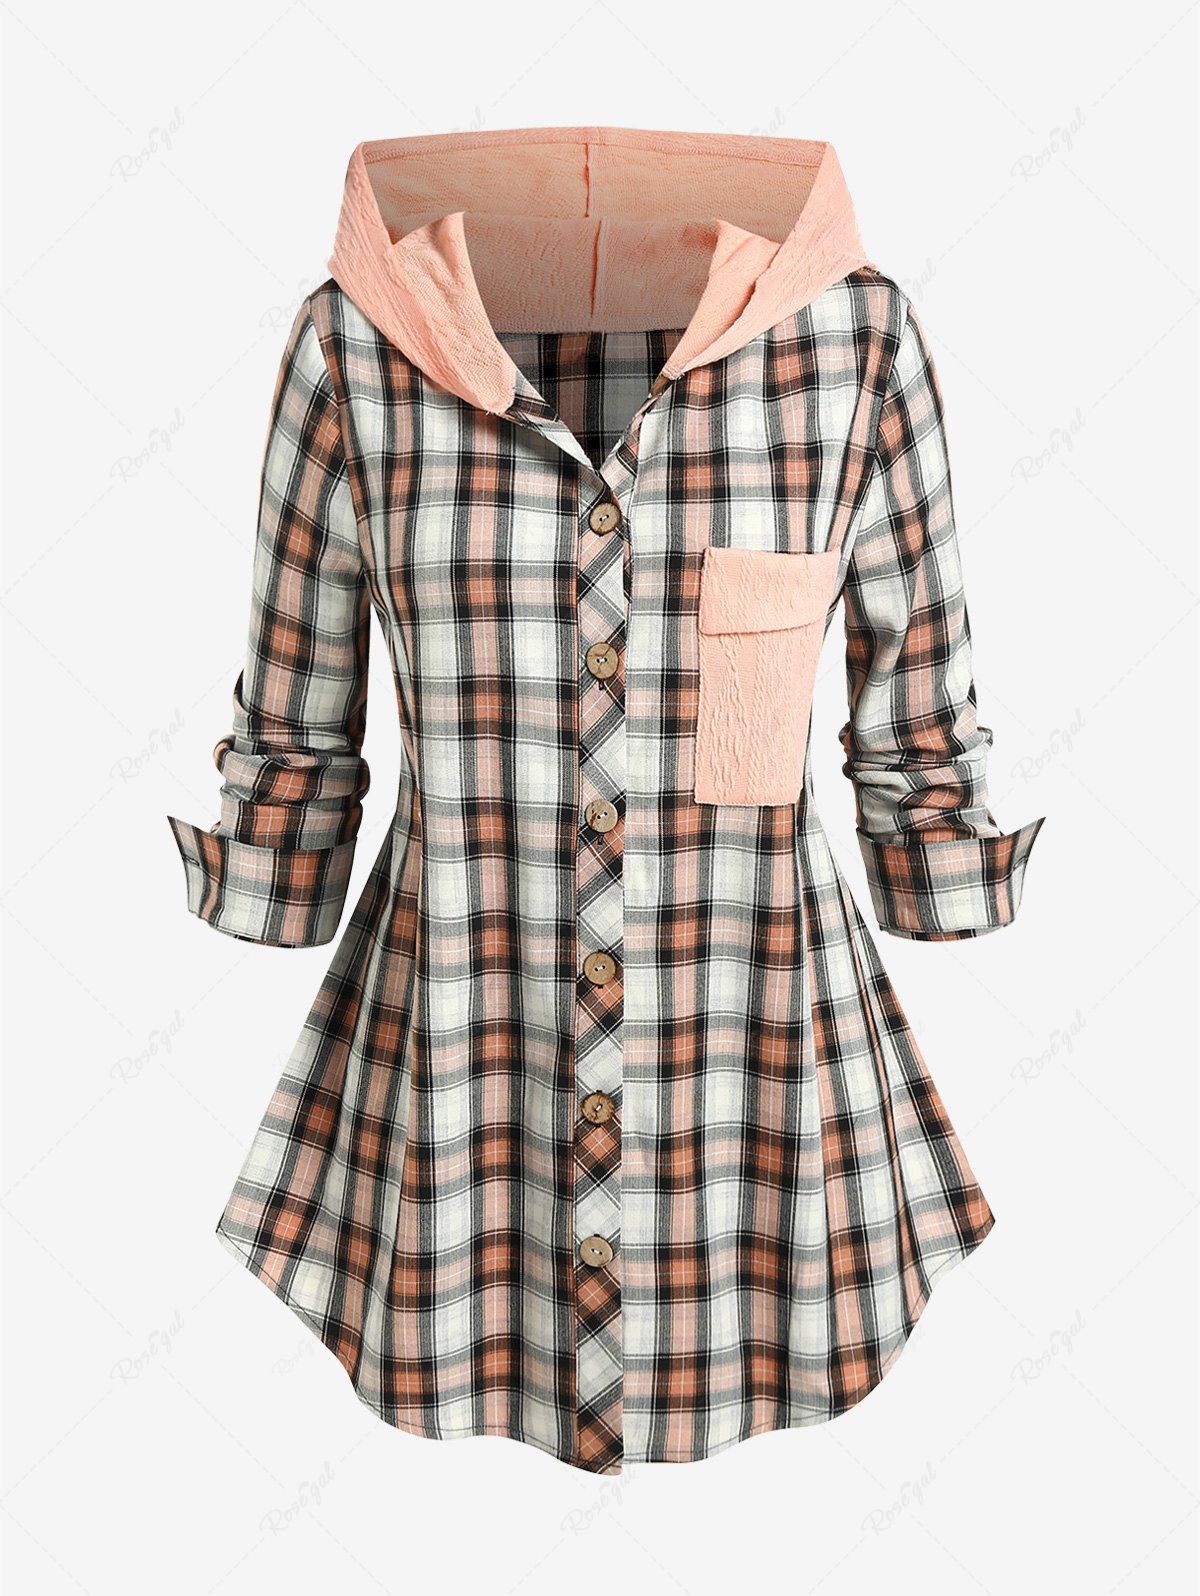 Hot Plus Size Plaid Colorblock Textured Hooded Shirt with Pocket  